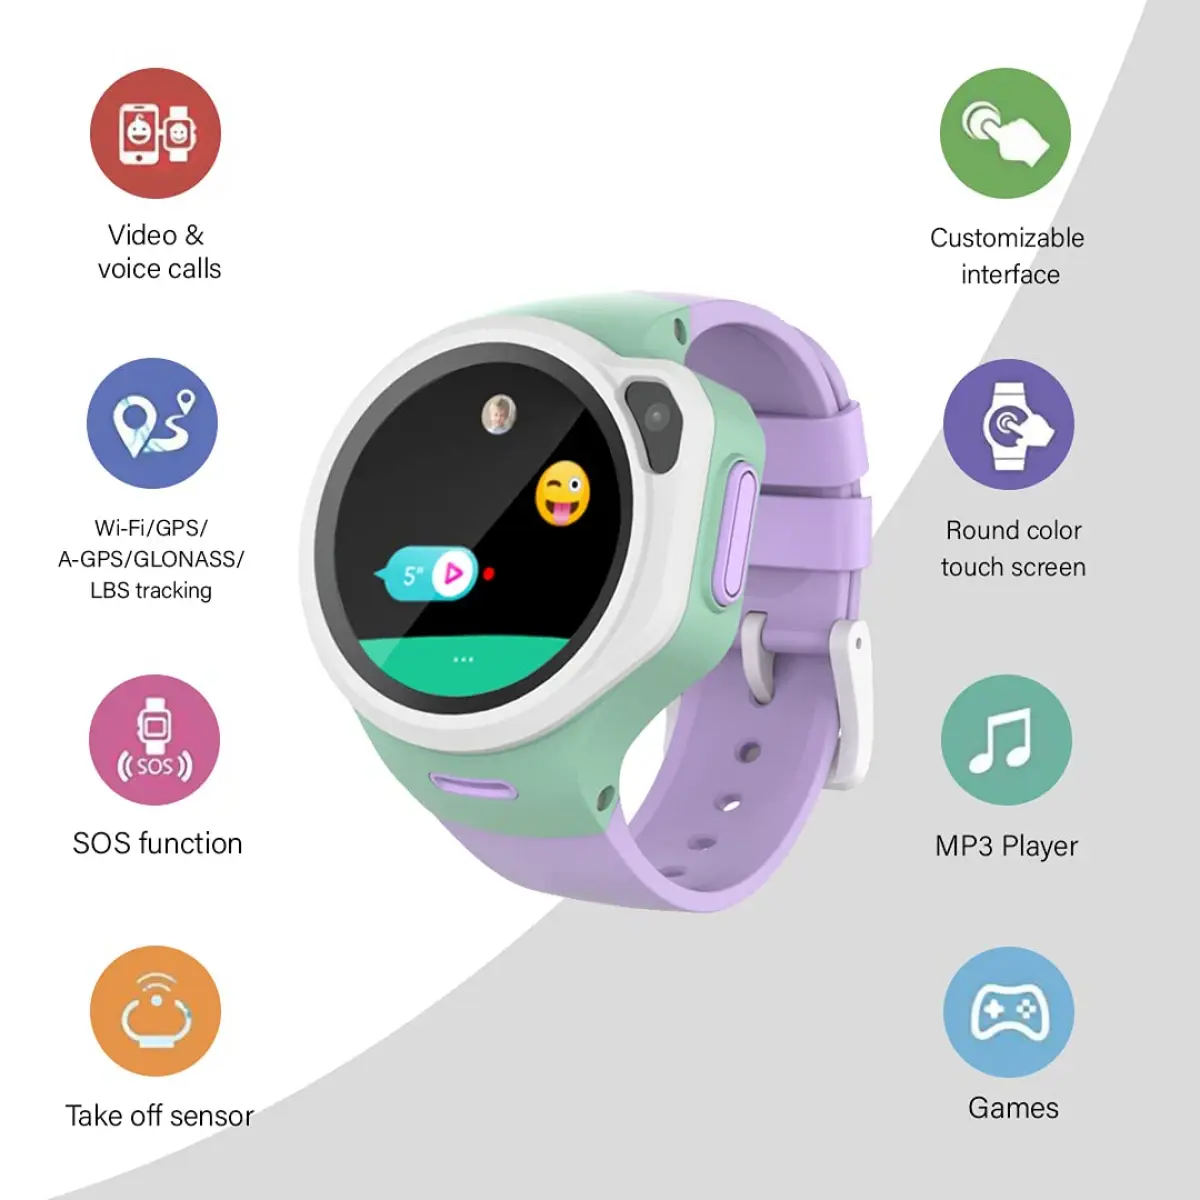 Watchout Nextgen Kids Smartwatch With 4G Video Call, Music, Games, Antitheft And Parental Control (Space Grey), 3Y+